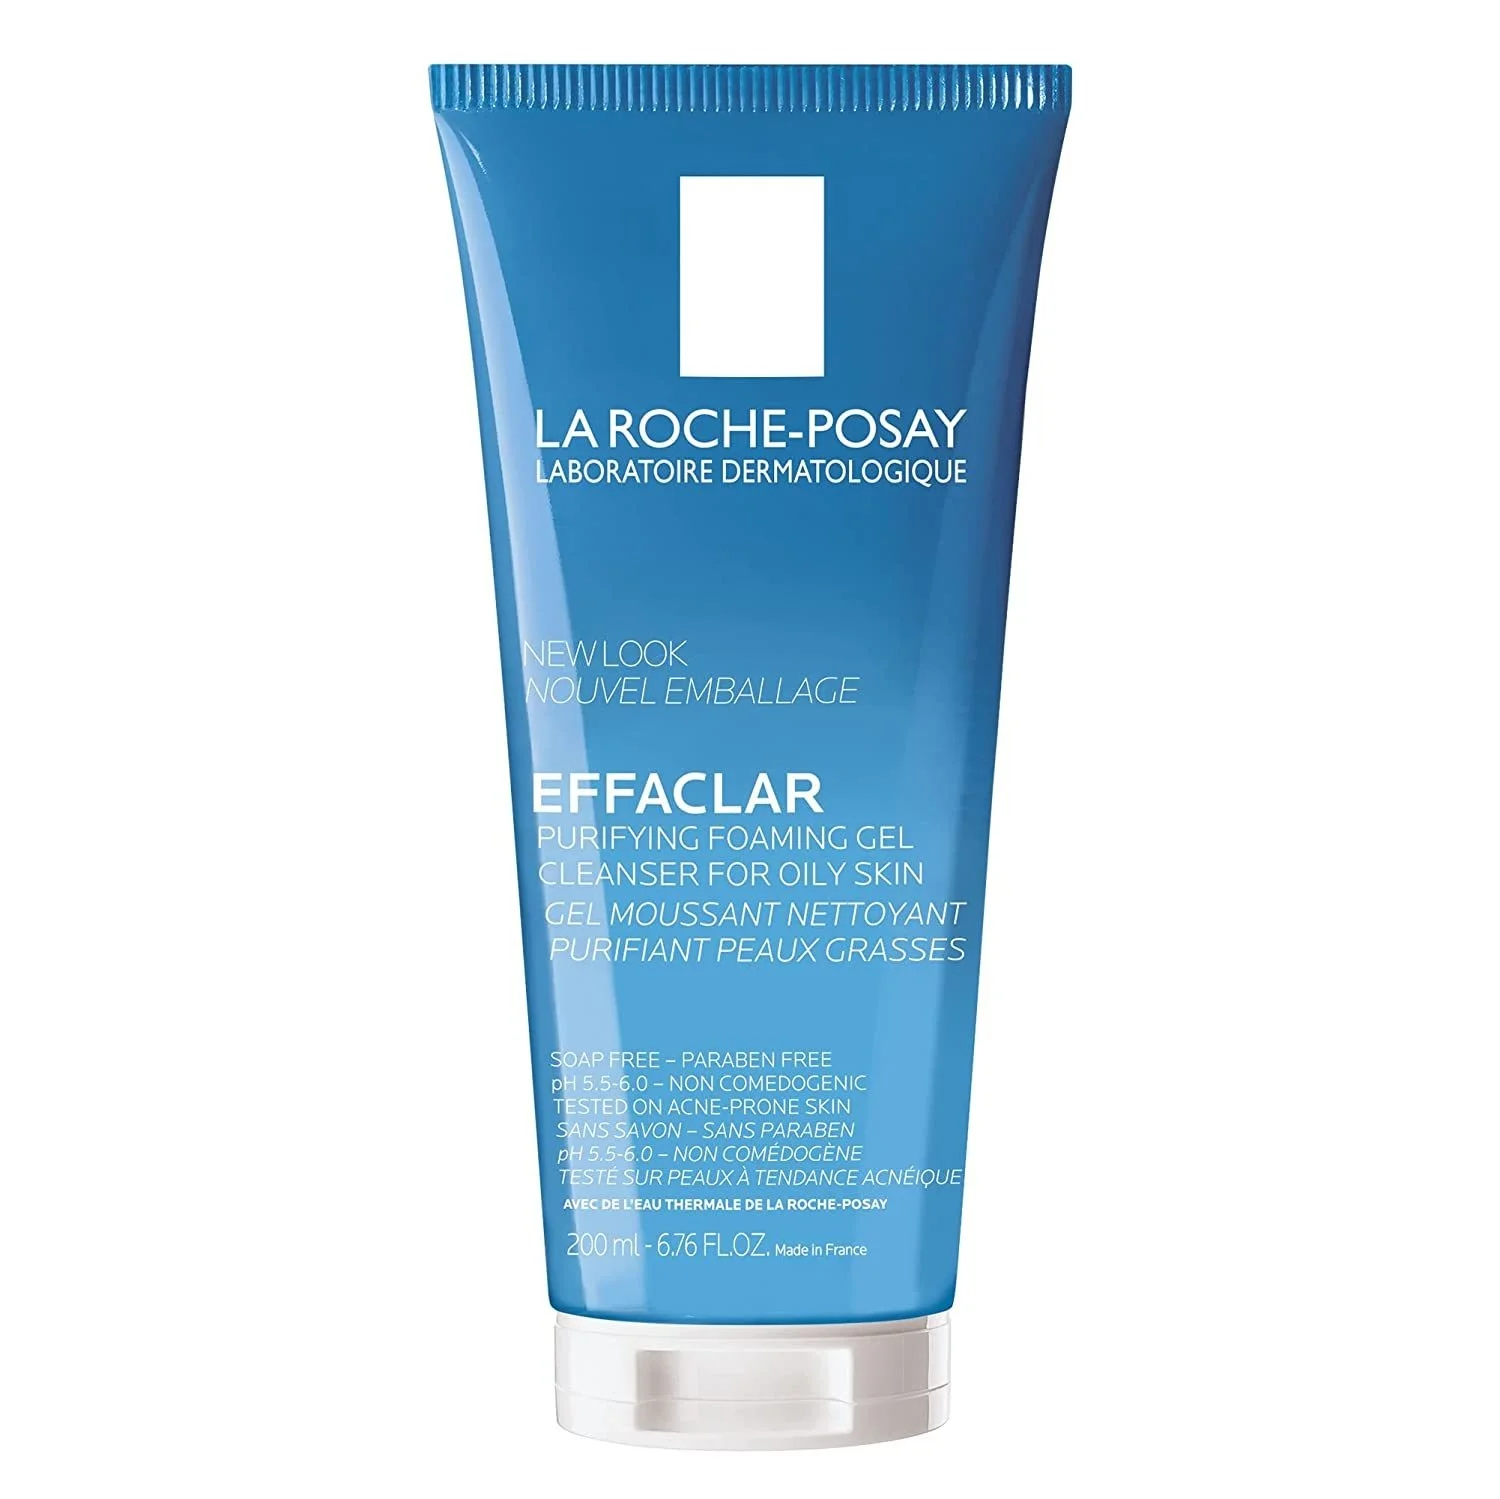 

La Roche-Posay Effaclar Purifying Foaming Gel Cleanser Deep Pores Cleanser Oil Free Acne Face Wash For Oil Sensitive Skin 200ml